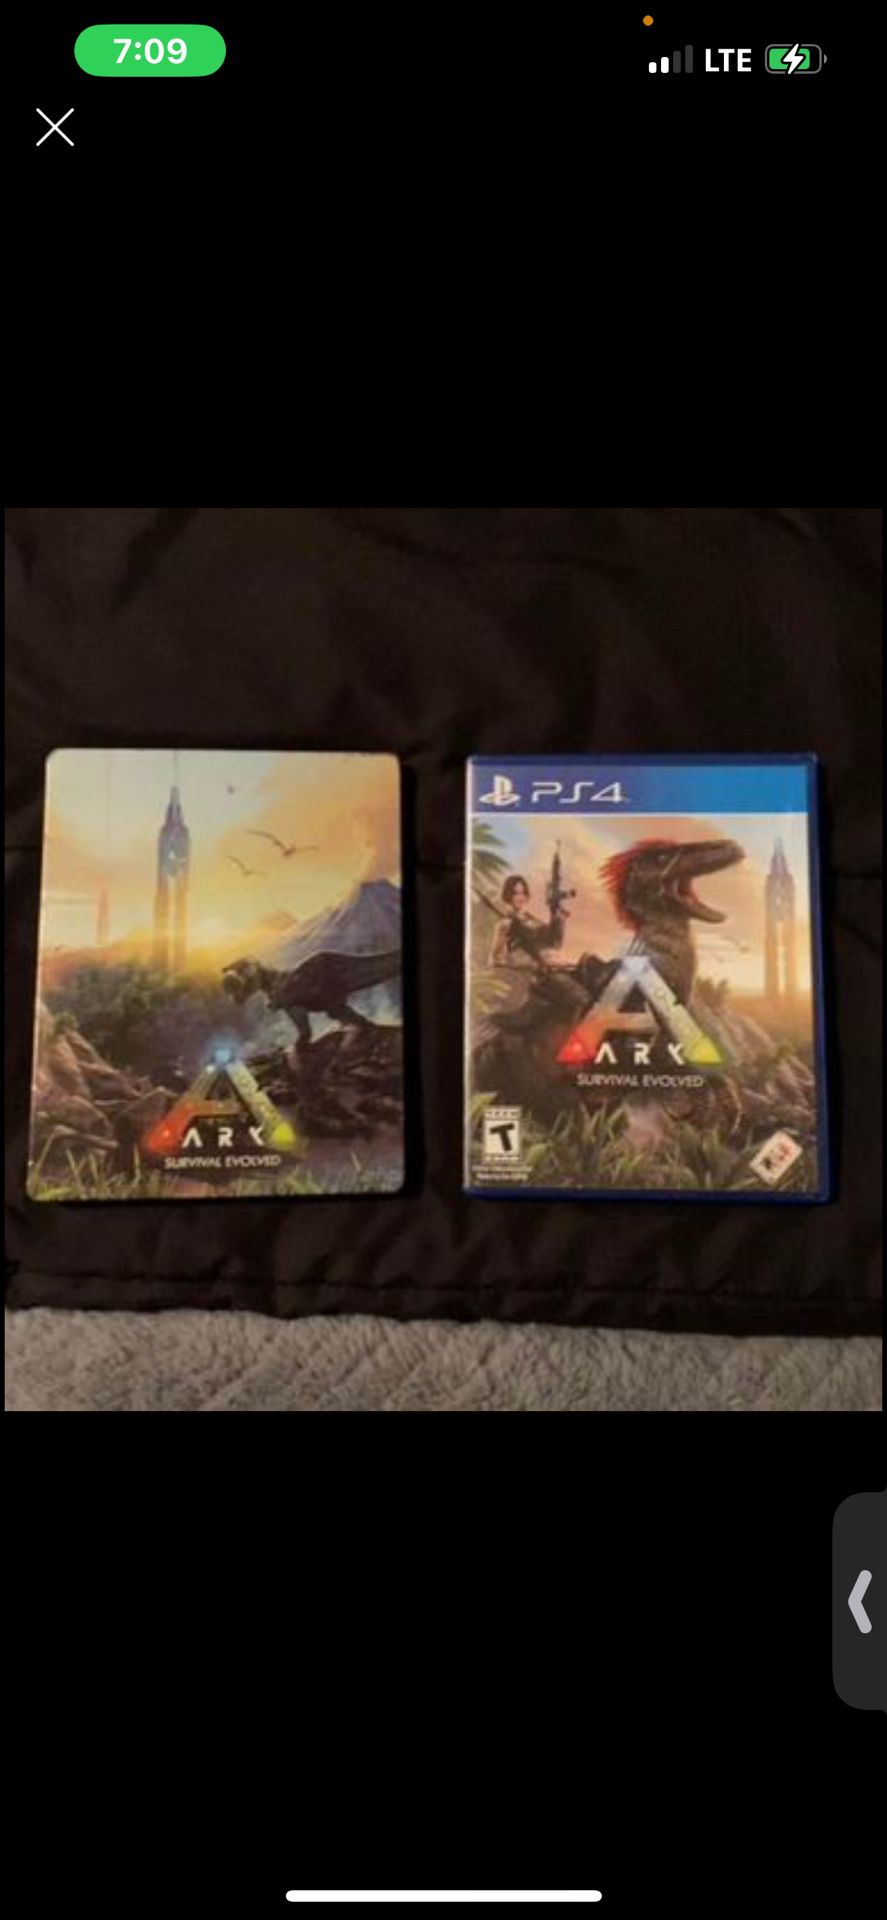 Ark Survival Evolved PS4 Limited Edition Case